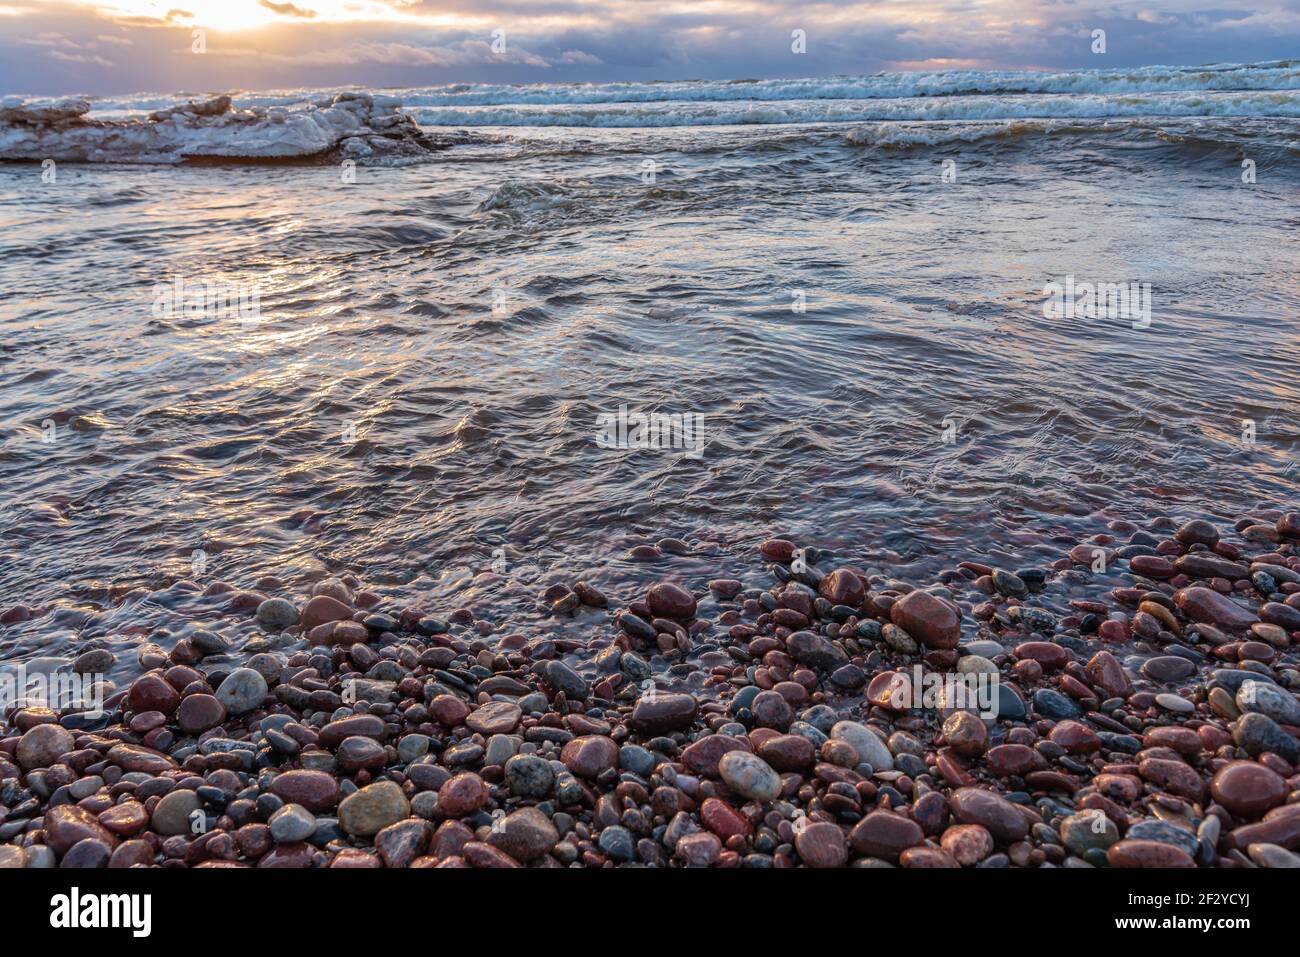 small stones on the sea shore with a sunset that illuminates the surface of the water and illuminates the colored stones and clouds in the sky Stock Photo